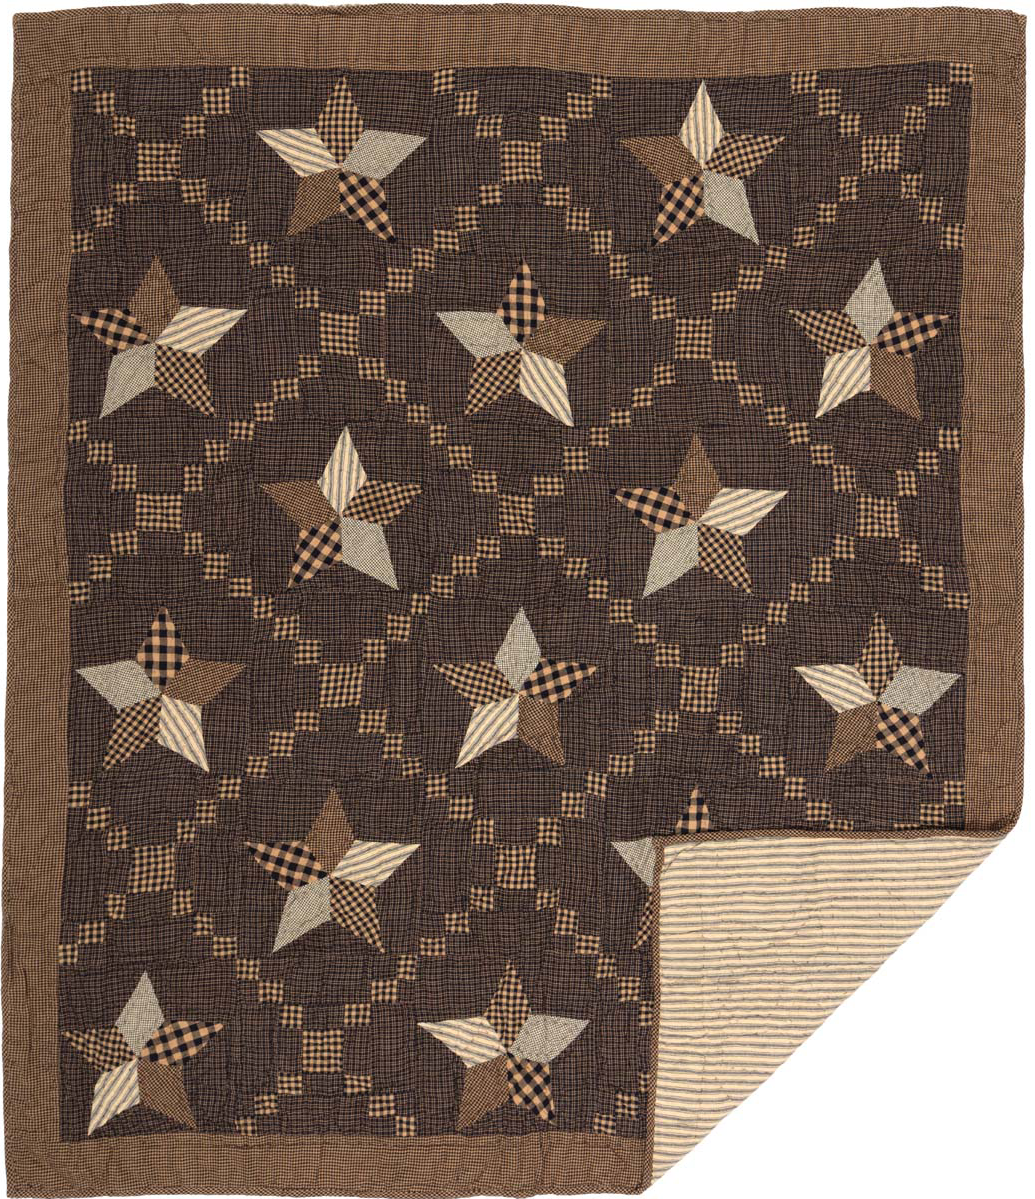 Farmhouse Star Quilted Throw 60x50 - Final Qtys - Allysons Place